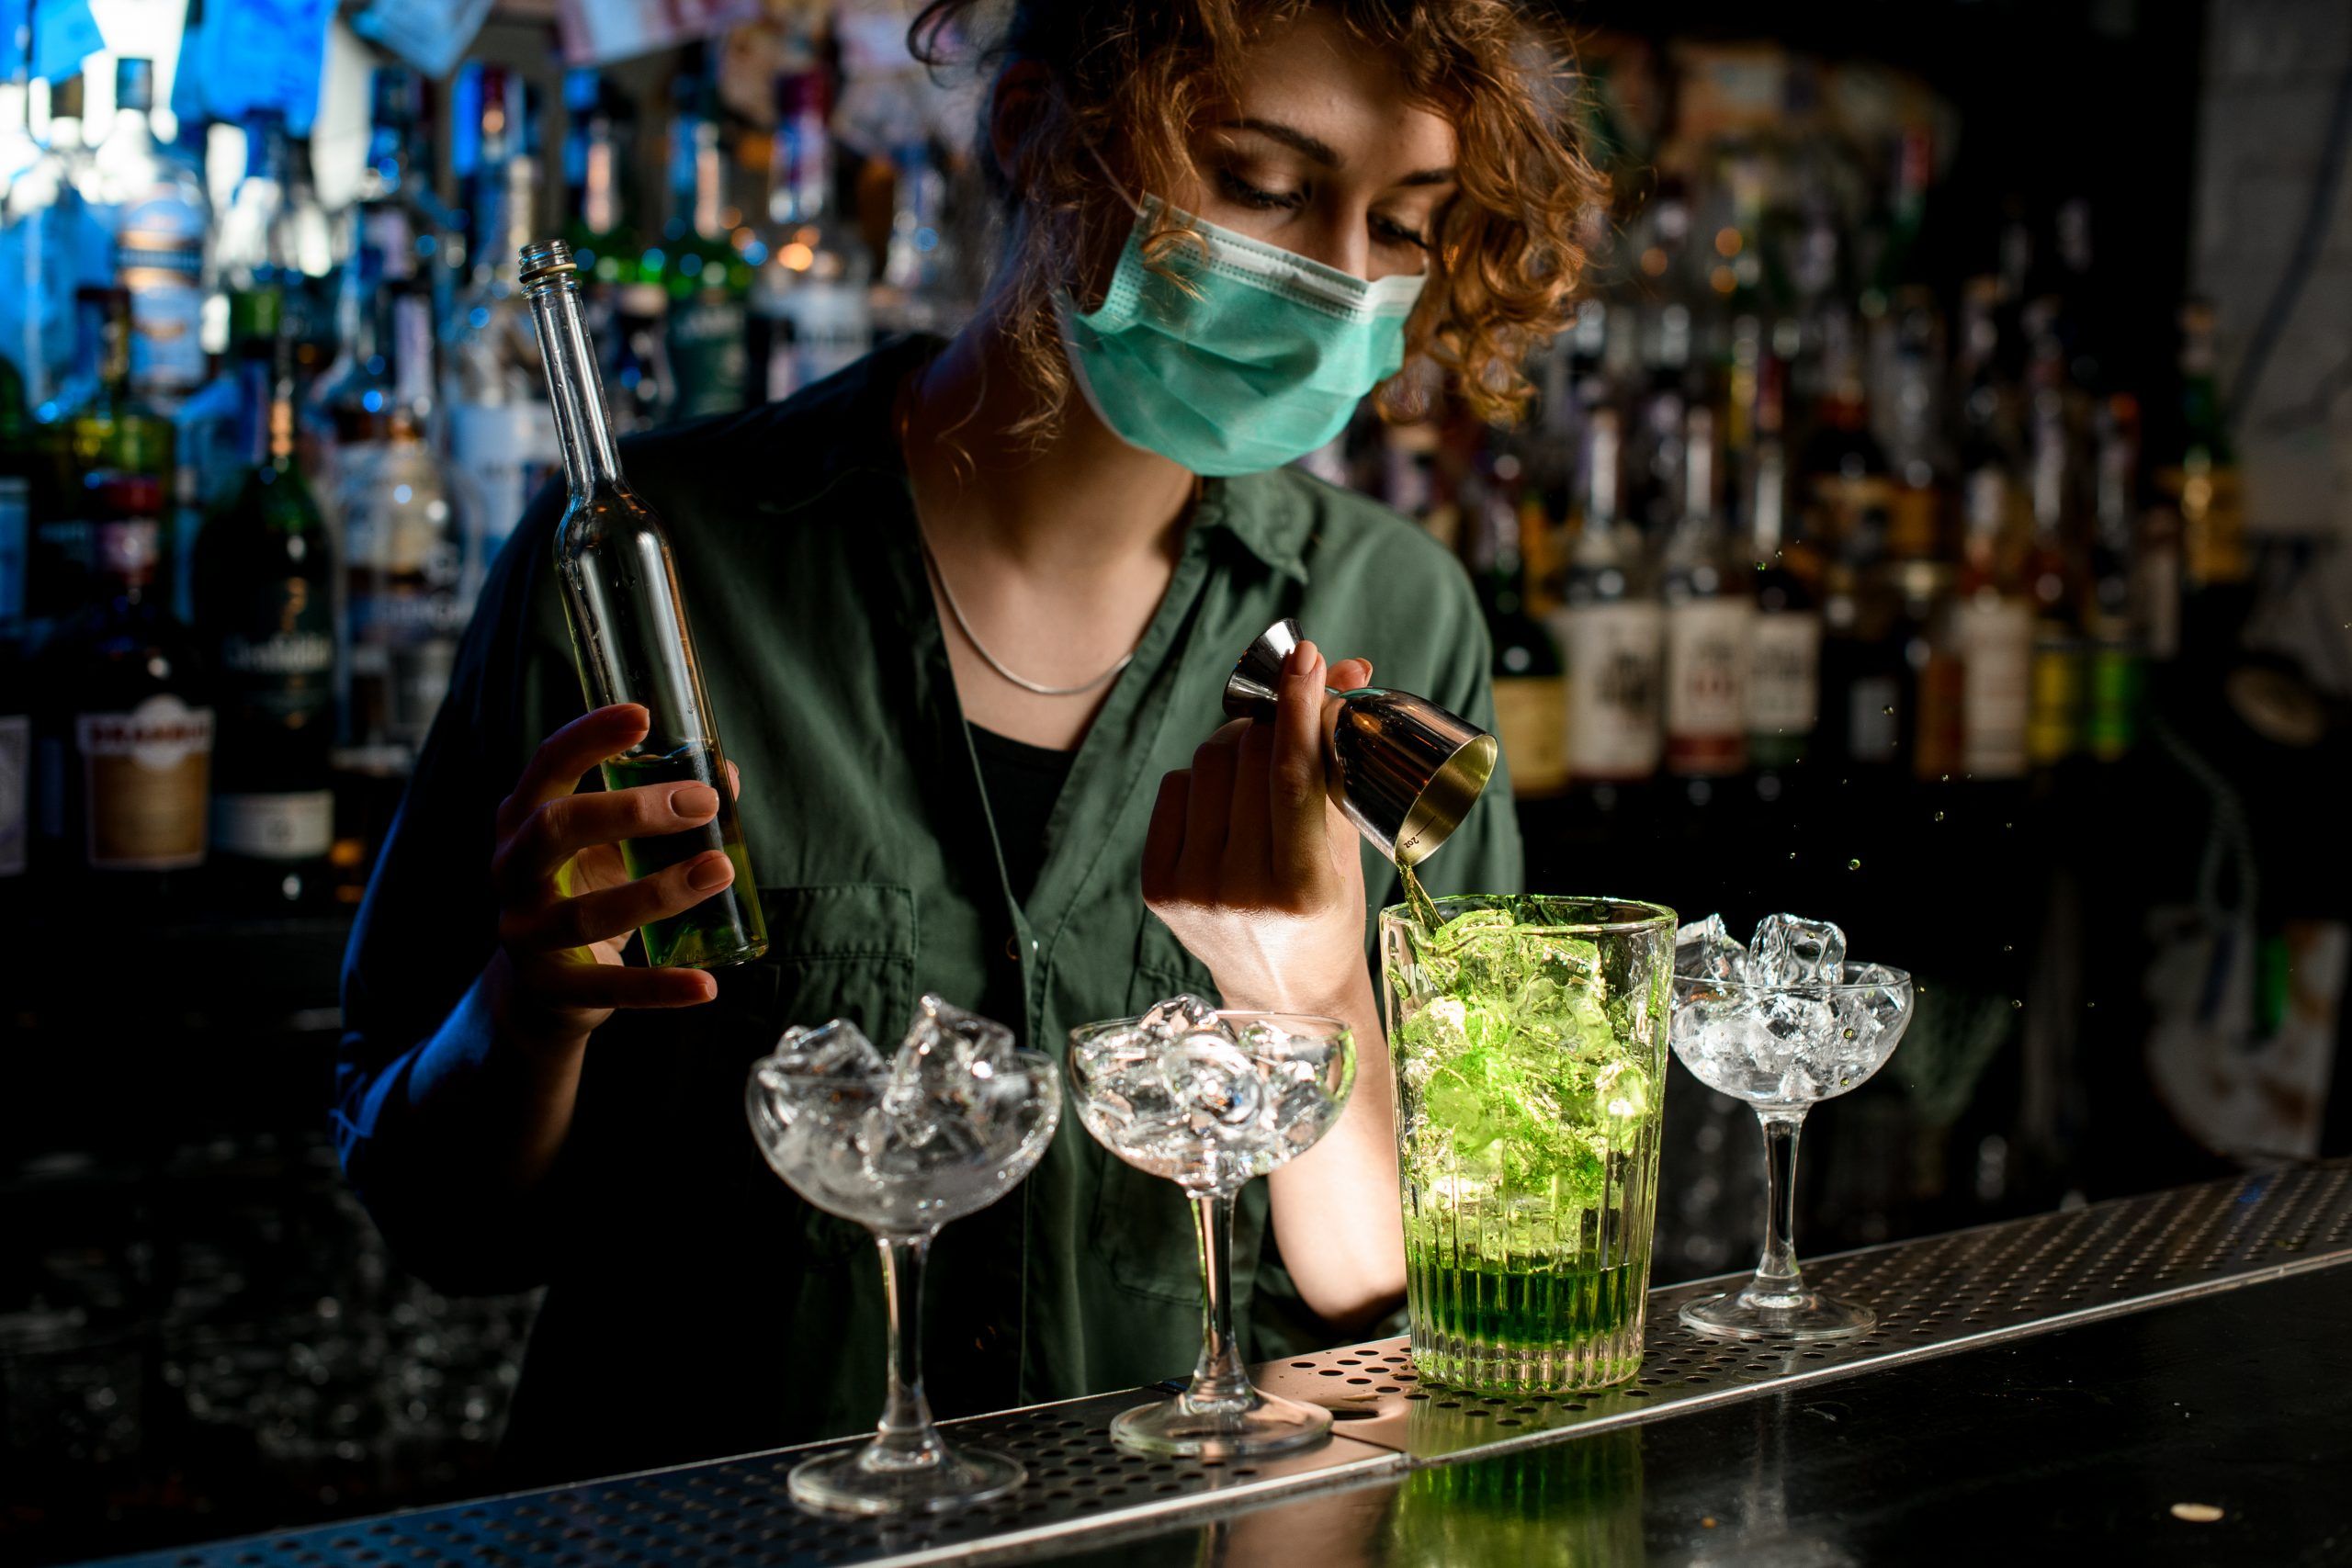 Alcohol may make it difficult for bar owners to maintain COVID prevention strategies. GETTY